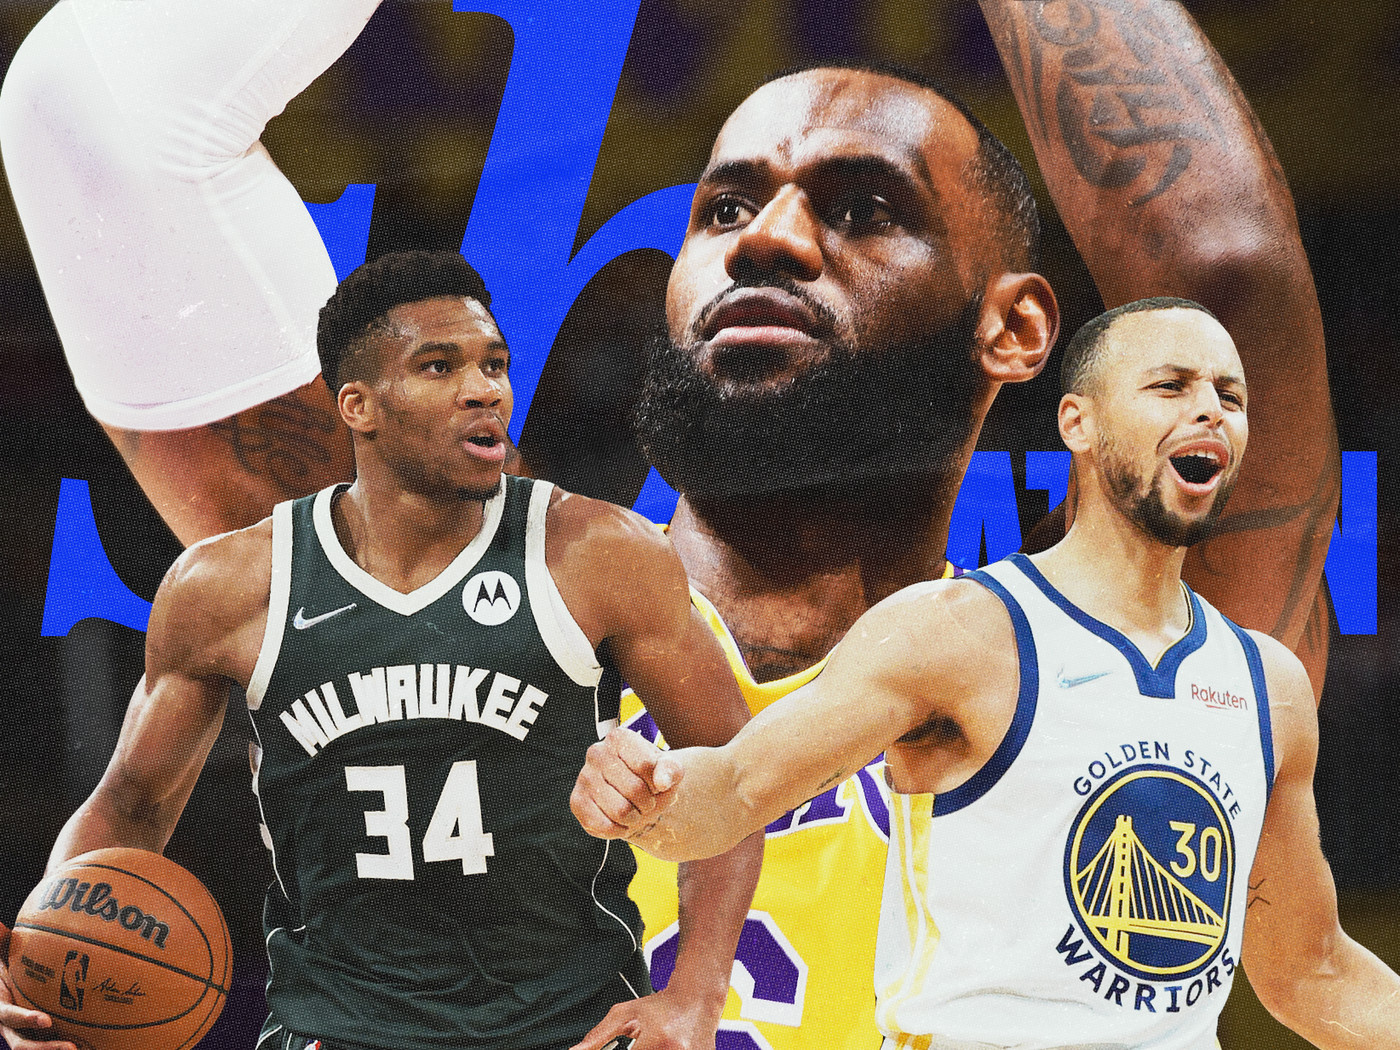 Nba Basketball Schedule 2022 Every Nba Team Ranked By Their 2022 Championship Chances - Sbnation.com